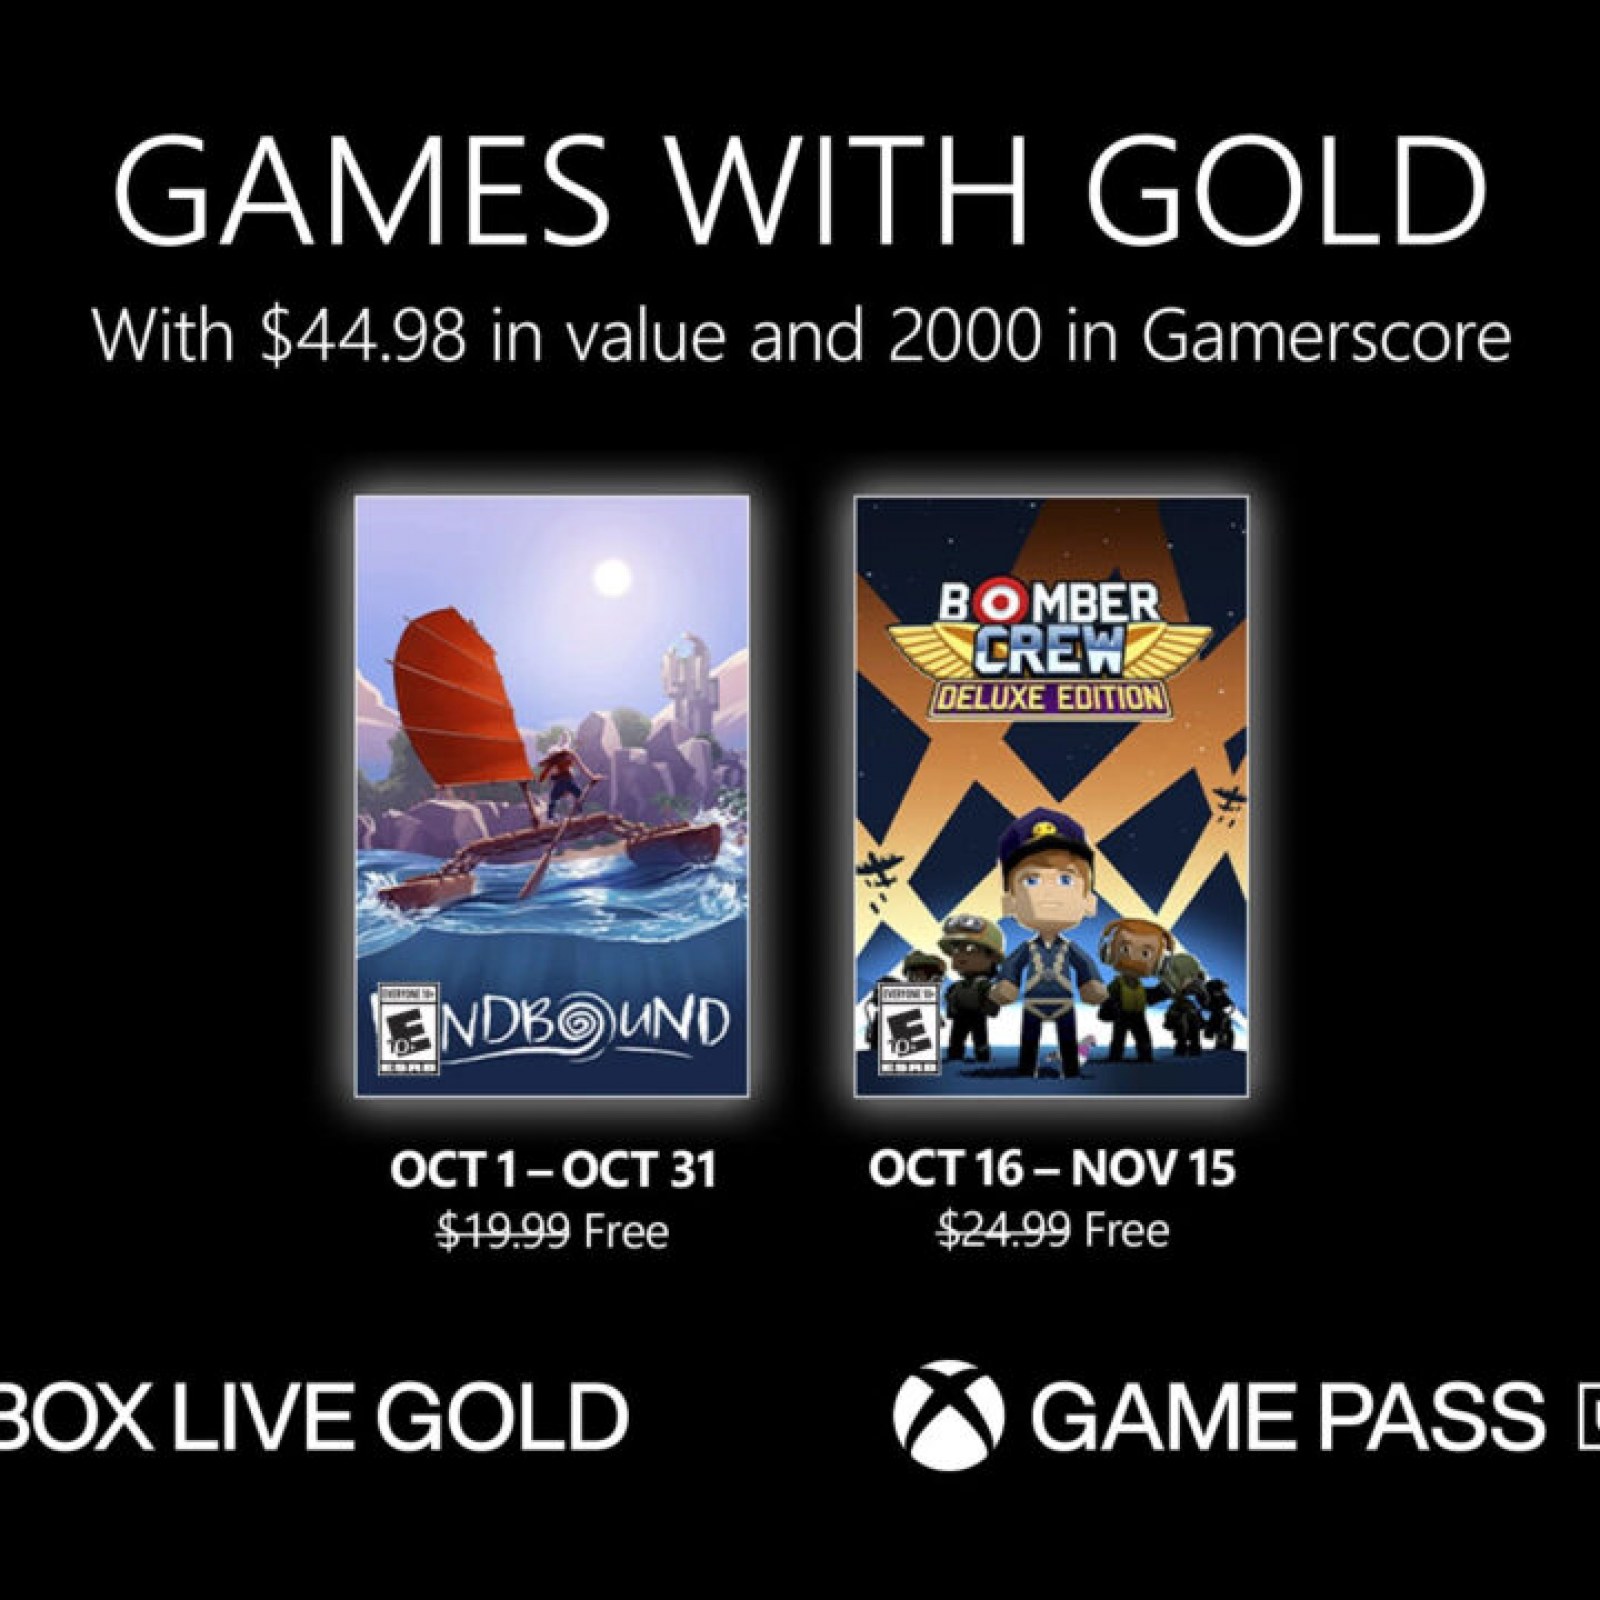 Games with Gold ditching Xbox 360 titles in October